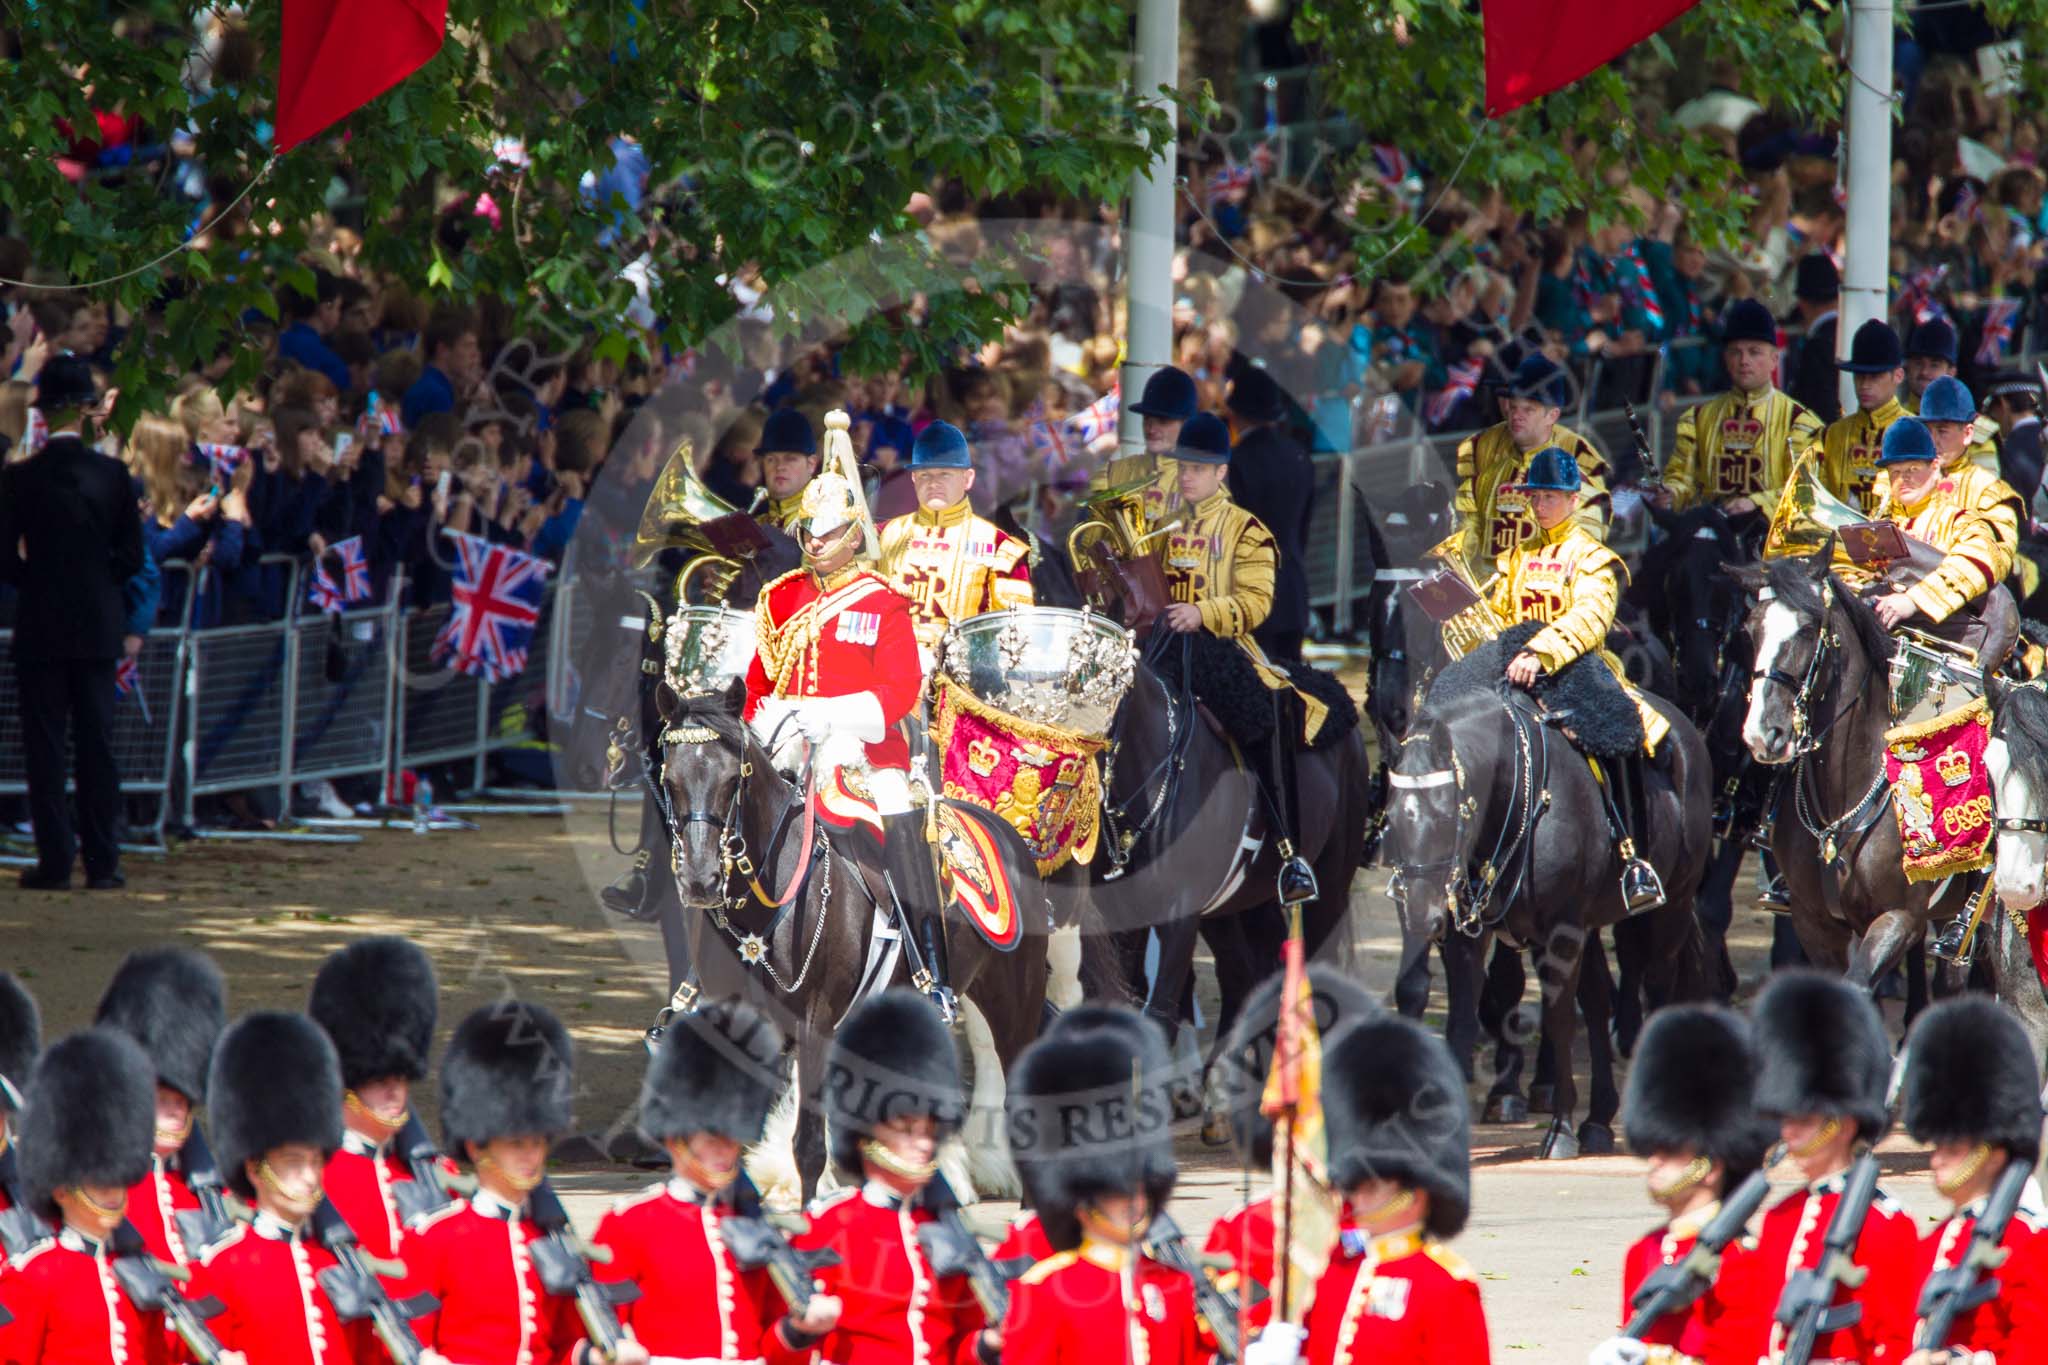 Trooping the Colour 2013: The Mounted Bands of the Household Cavalry are marching down Horse Guards Road as the third element of the Royal Procession. Image #237, 15 June 2013 10:56 Horse Guards Parade, London, UK